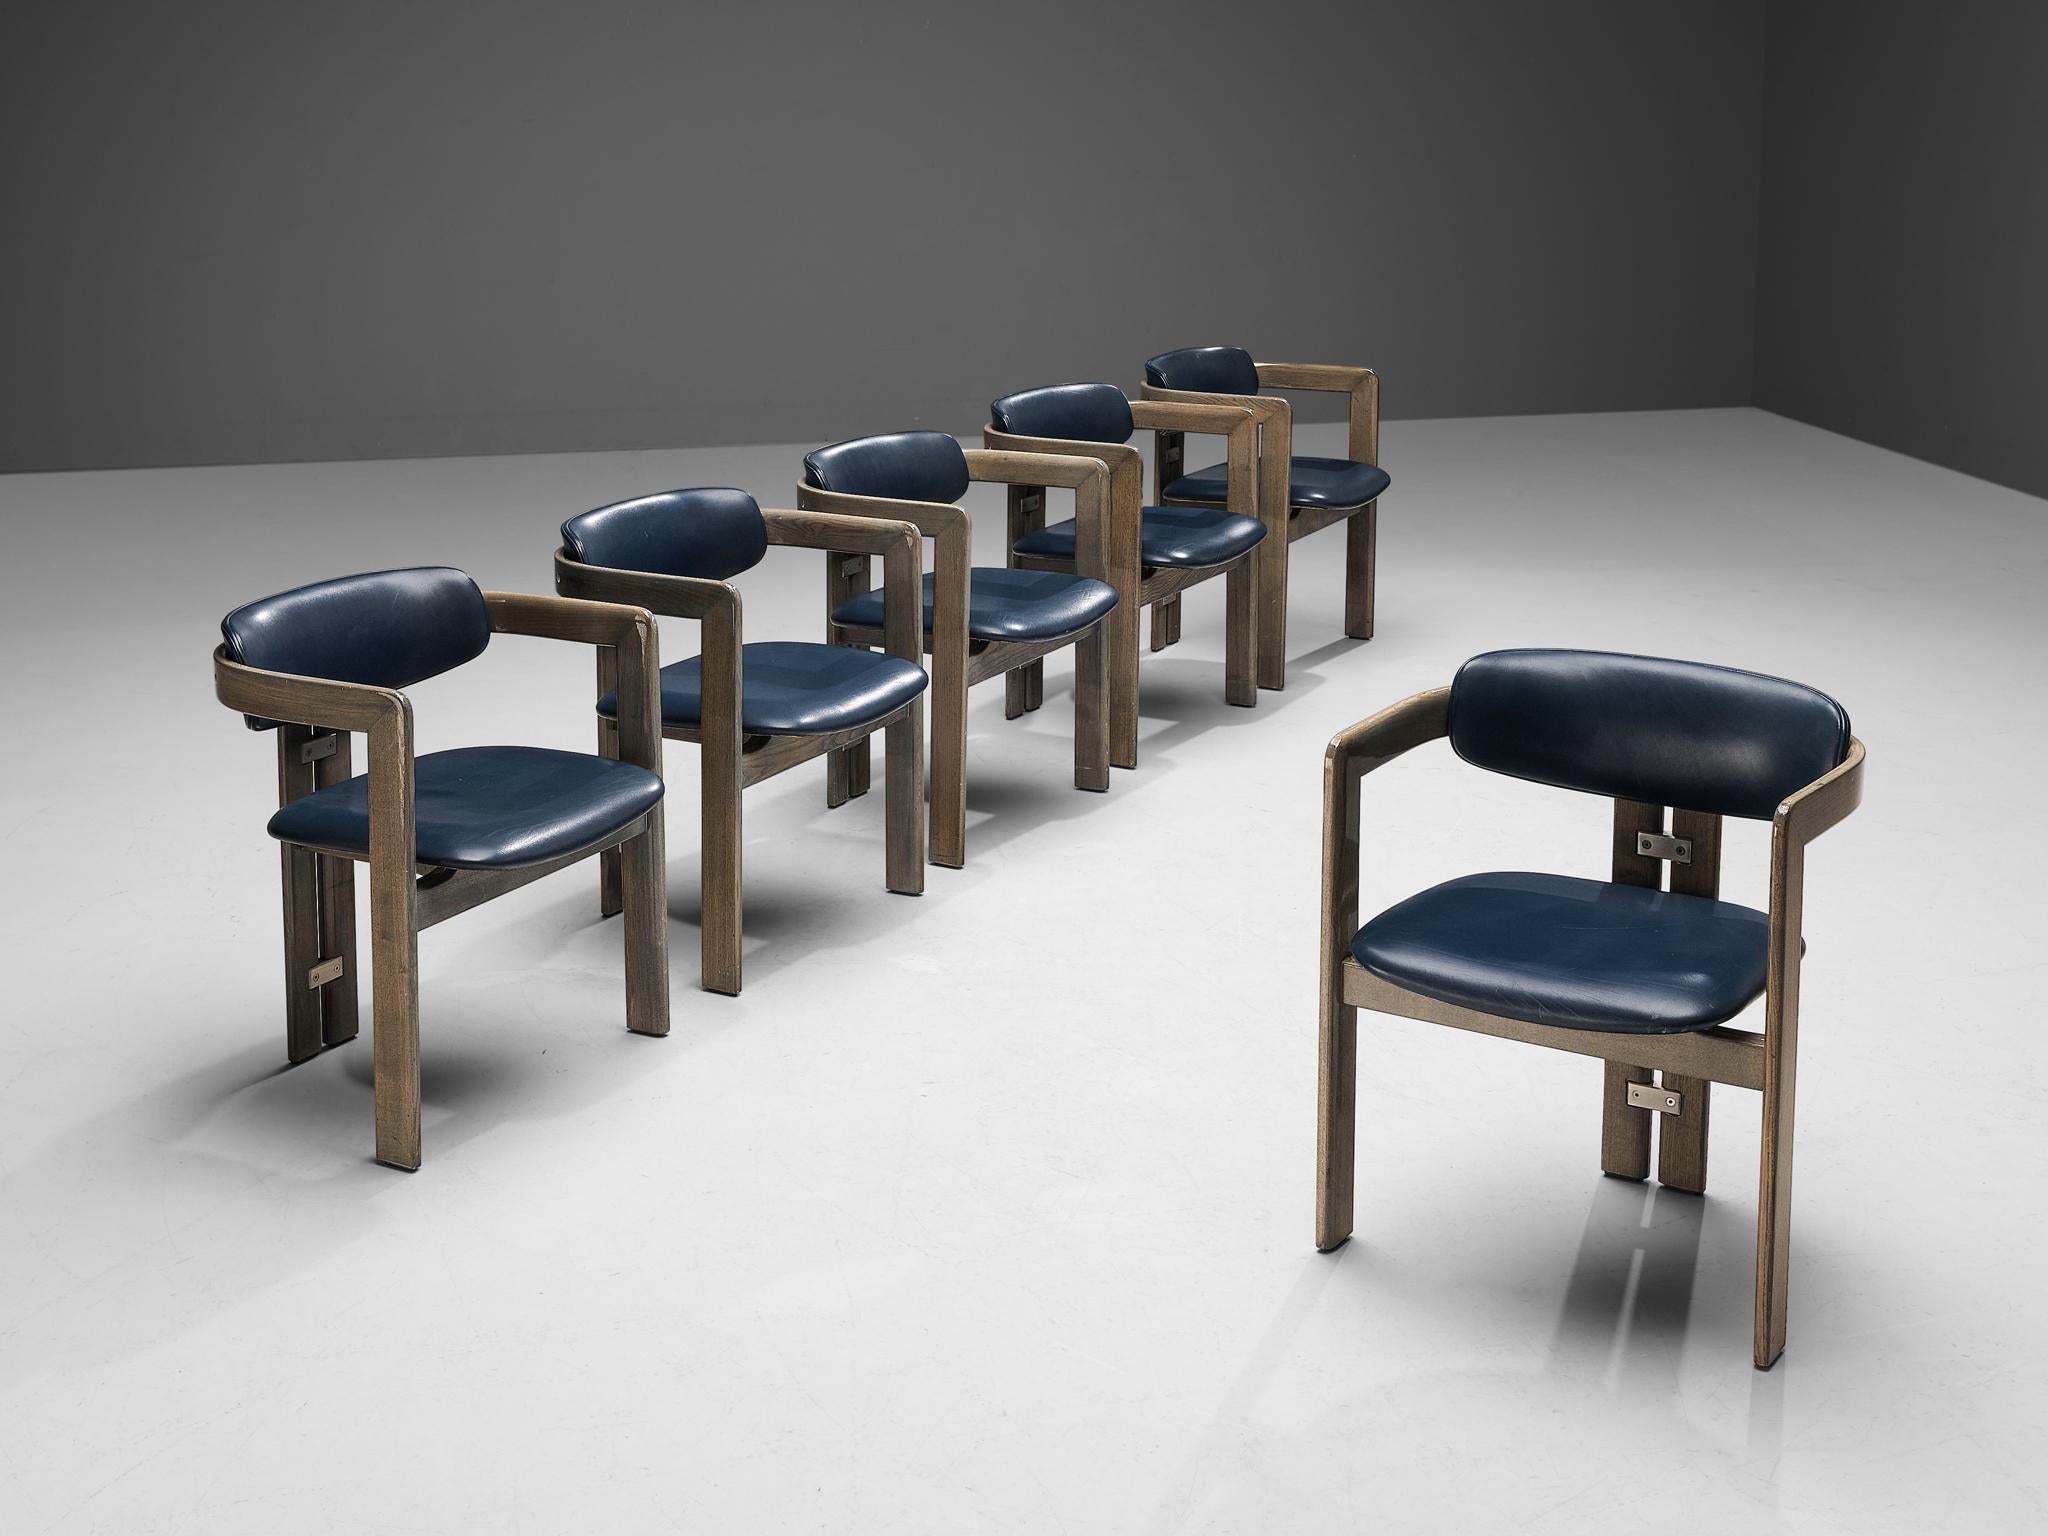 Augusto Savini for Pozzi, set of six 'Pamplona' dining chairs, oak, blue leather upholstery, aluminum, Italy, 1965.

Set of six armchairs in walnut and blue leather upholstery. A characteristic design; simplistic yet very strong in lines and